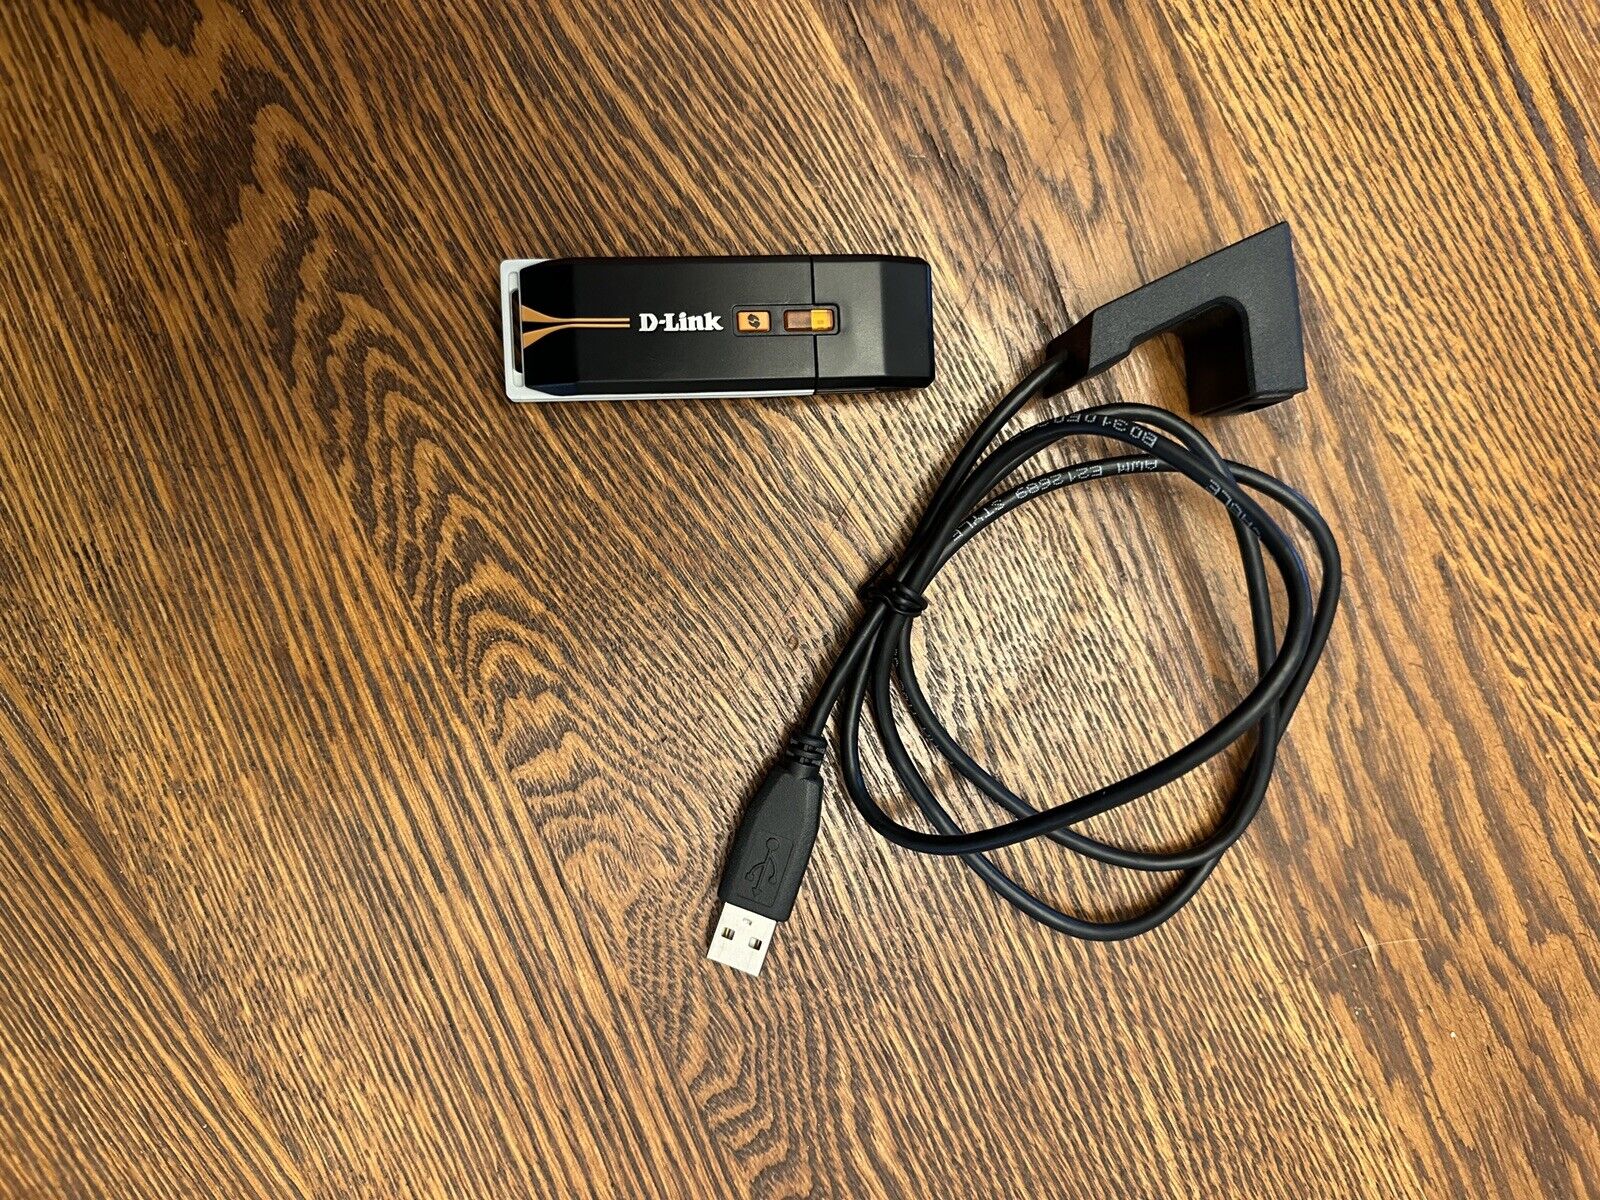 D-link DWA-125 Wireless Adapter With USB Extension Cord